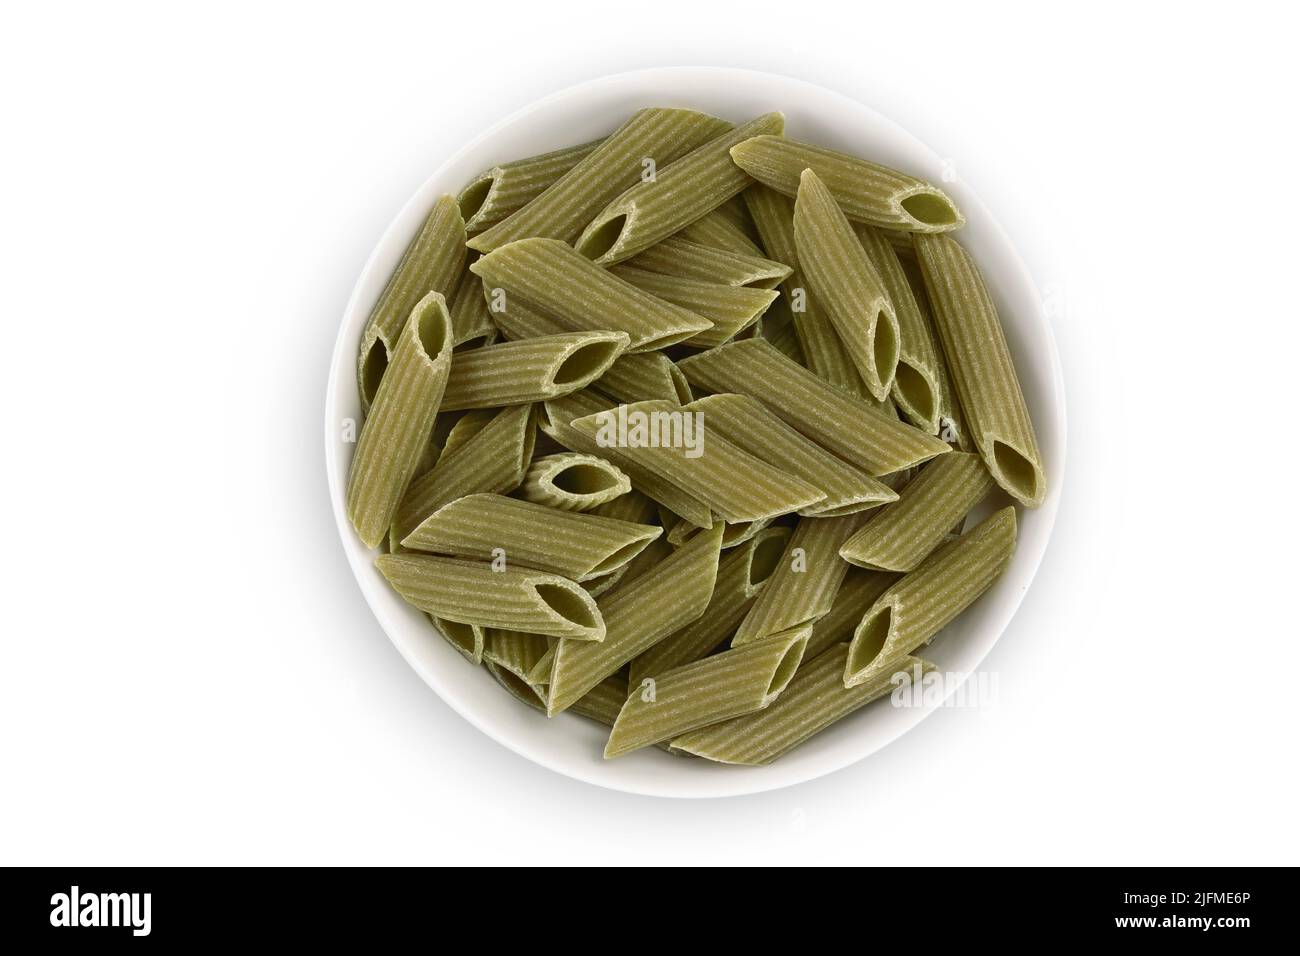 Green pea penne pasta in ceramic bowl isolated on white background. Organic food speciality. Gluten free. Top view. Flat lay Stock Photo